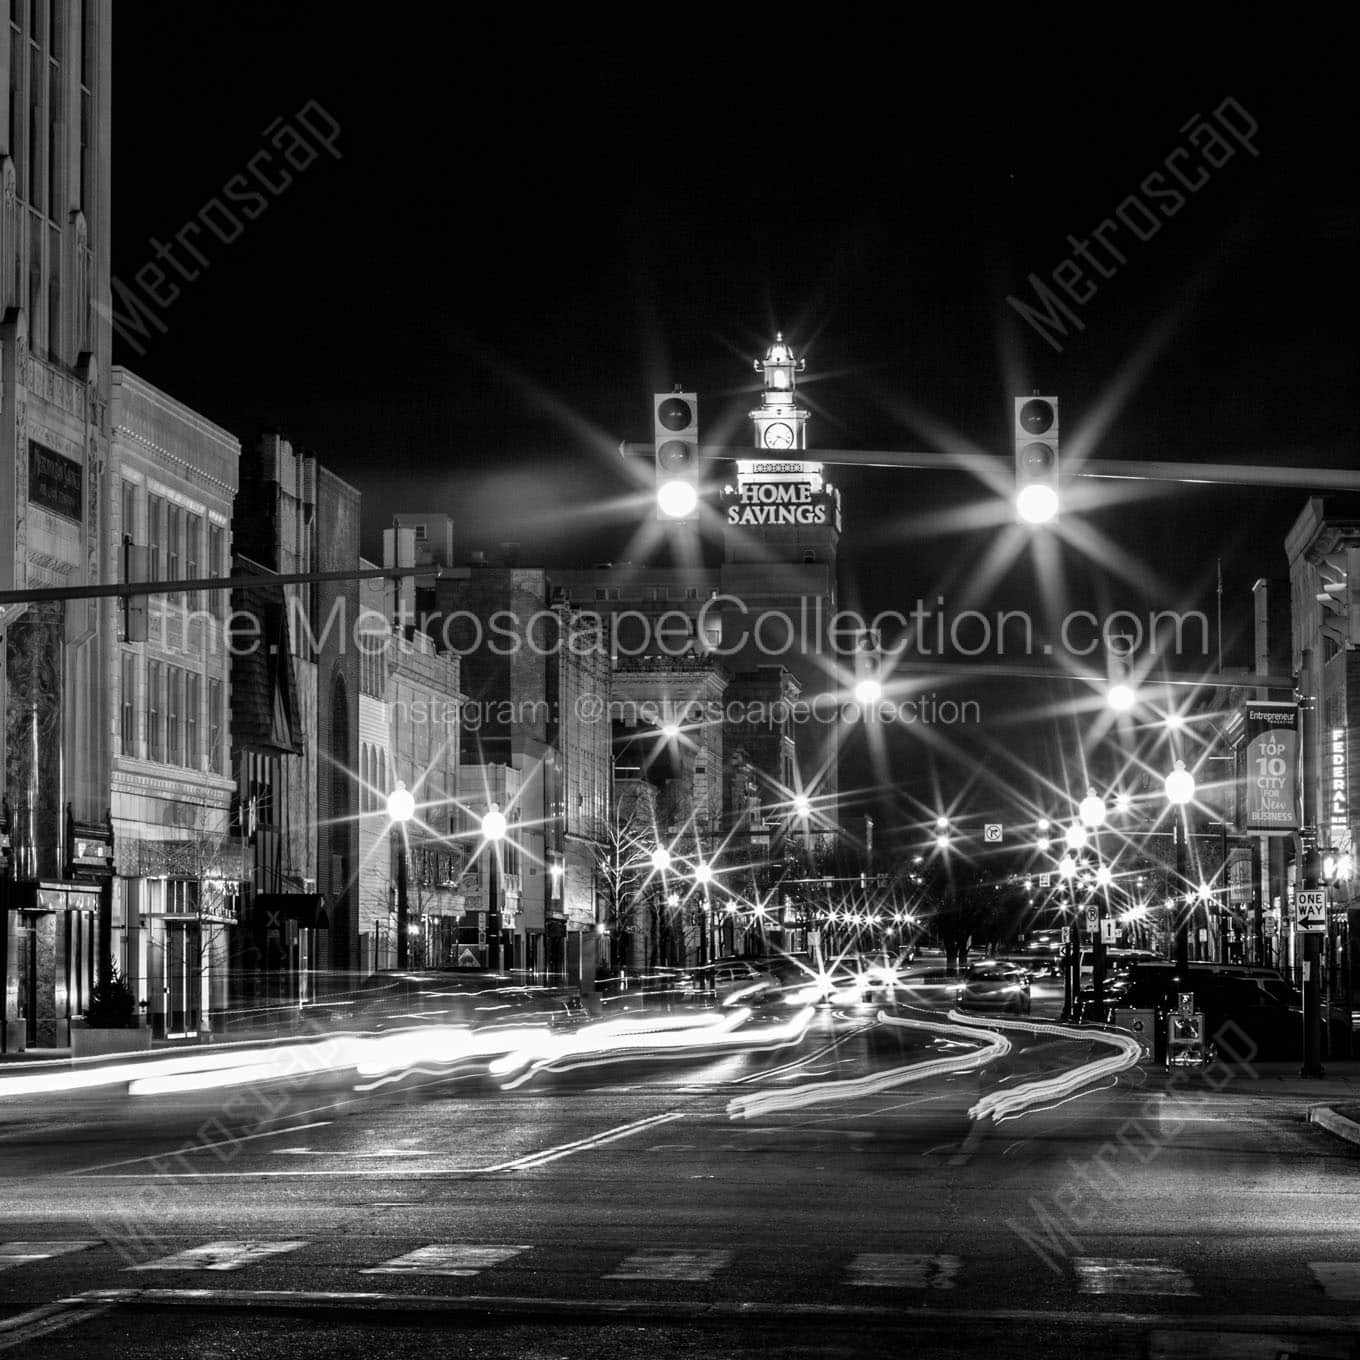 home savings bank on federal plaza at night Black & White Office Art